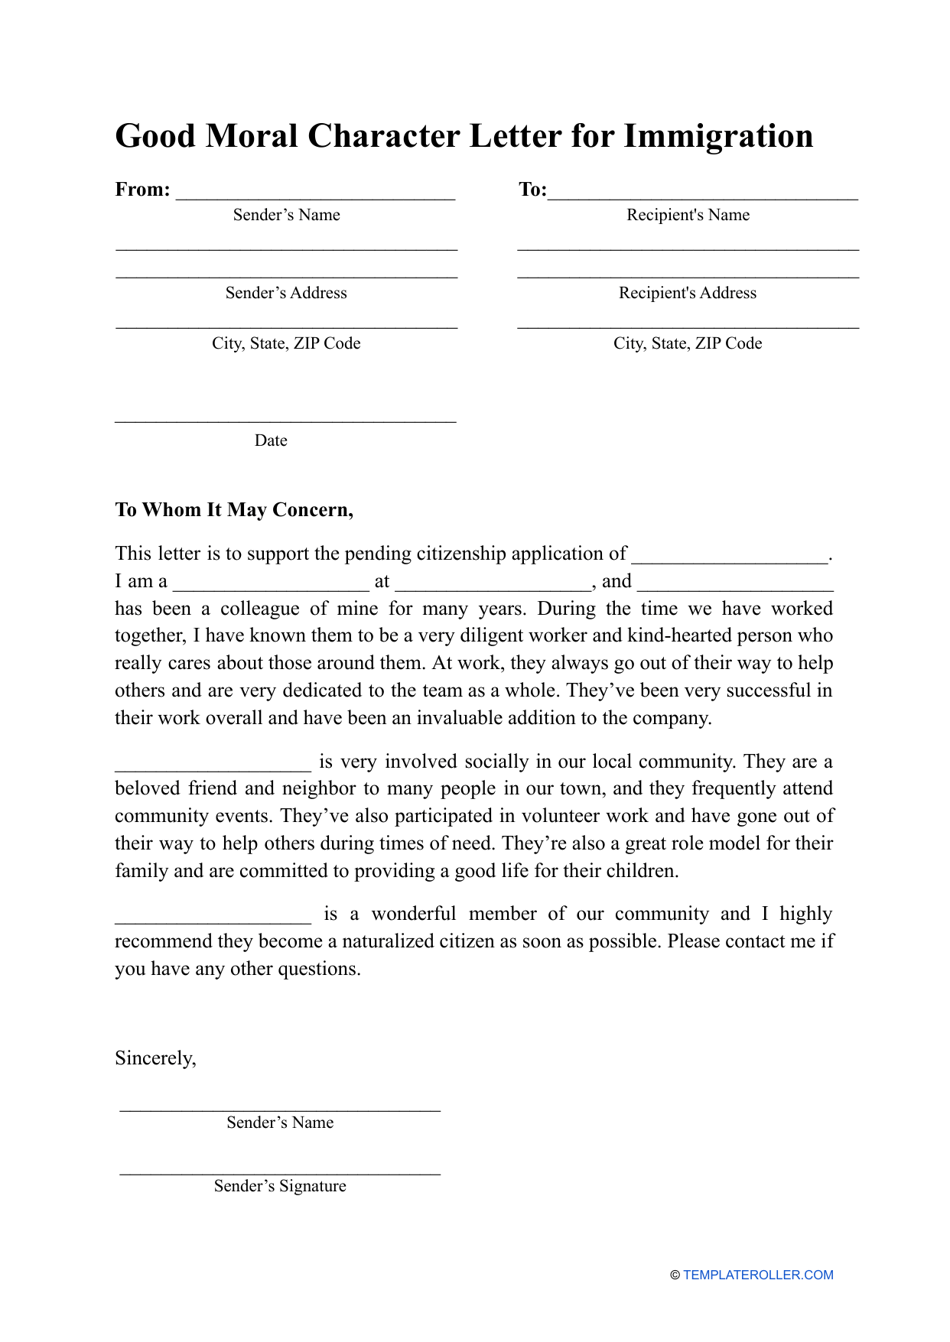 Good Moral Character Letter for Immigration Template